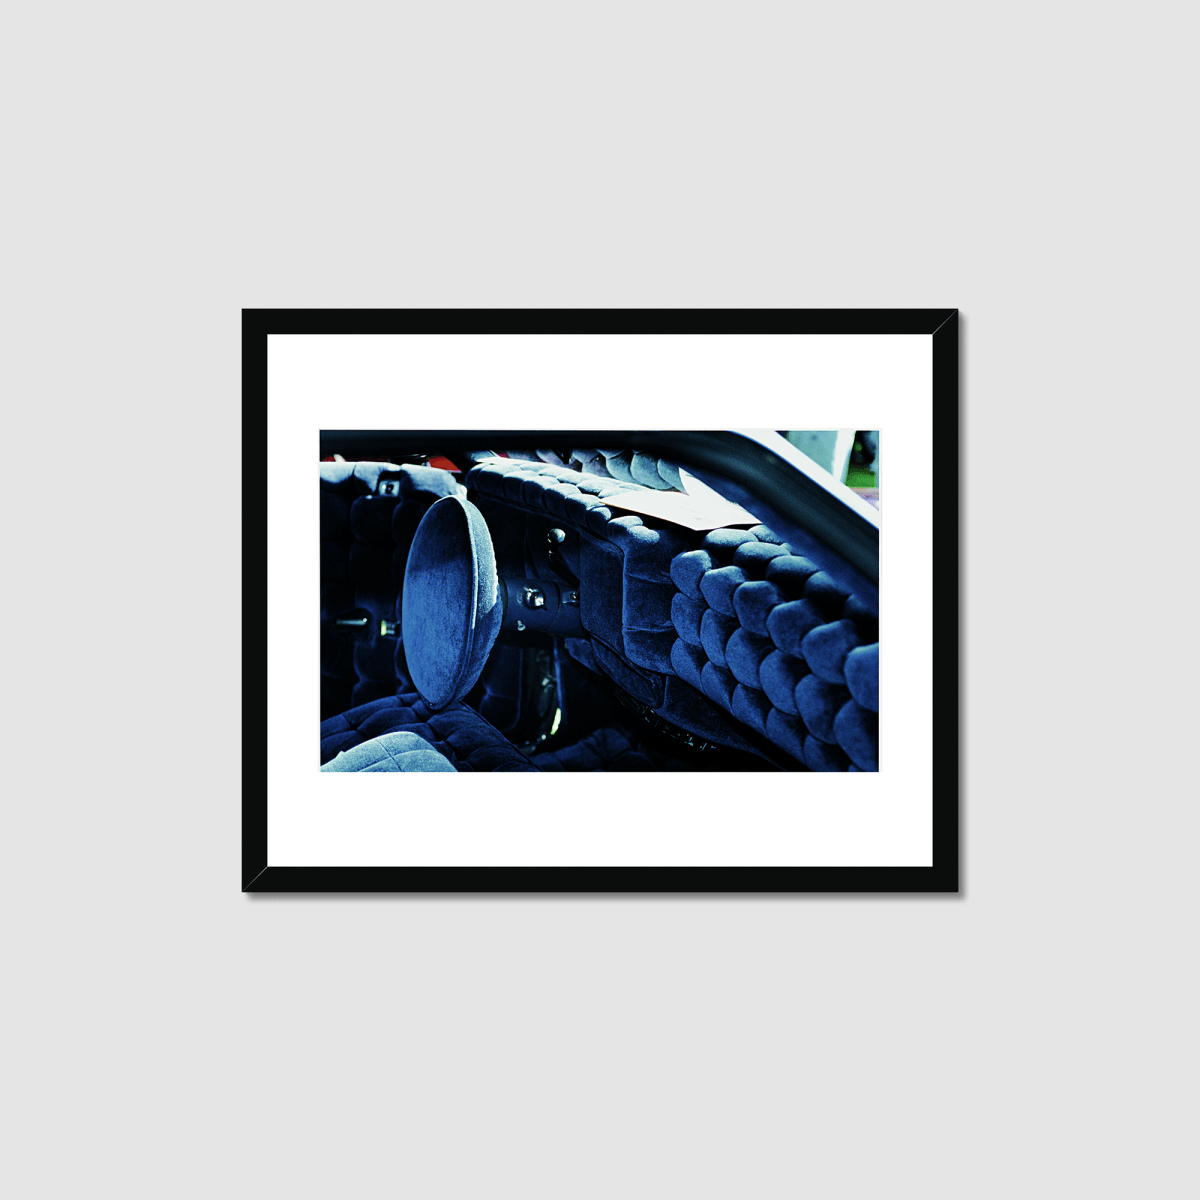 Velour Tuck-and-Roll at Lowrider Picnic Framed Print